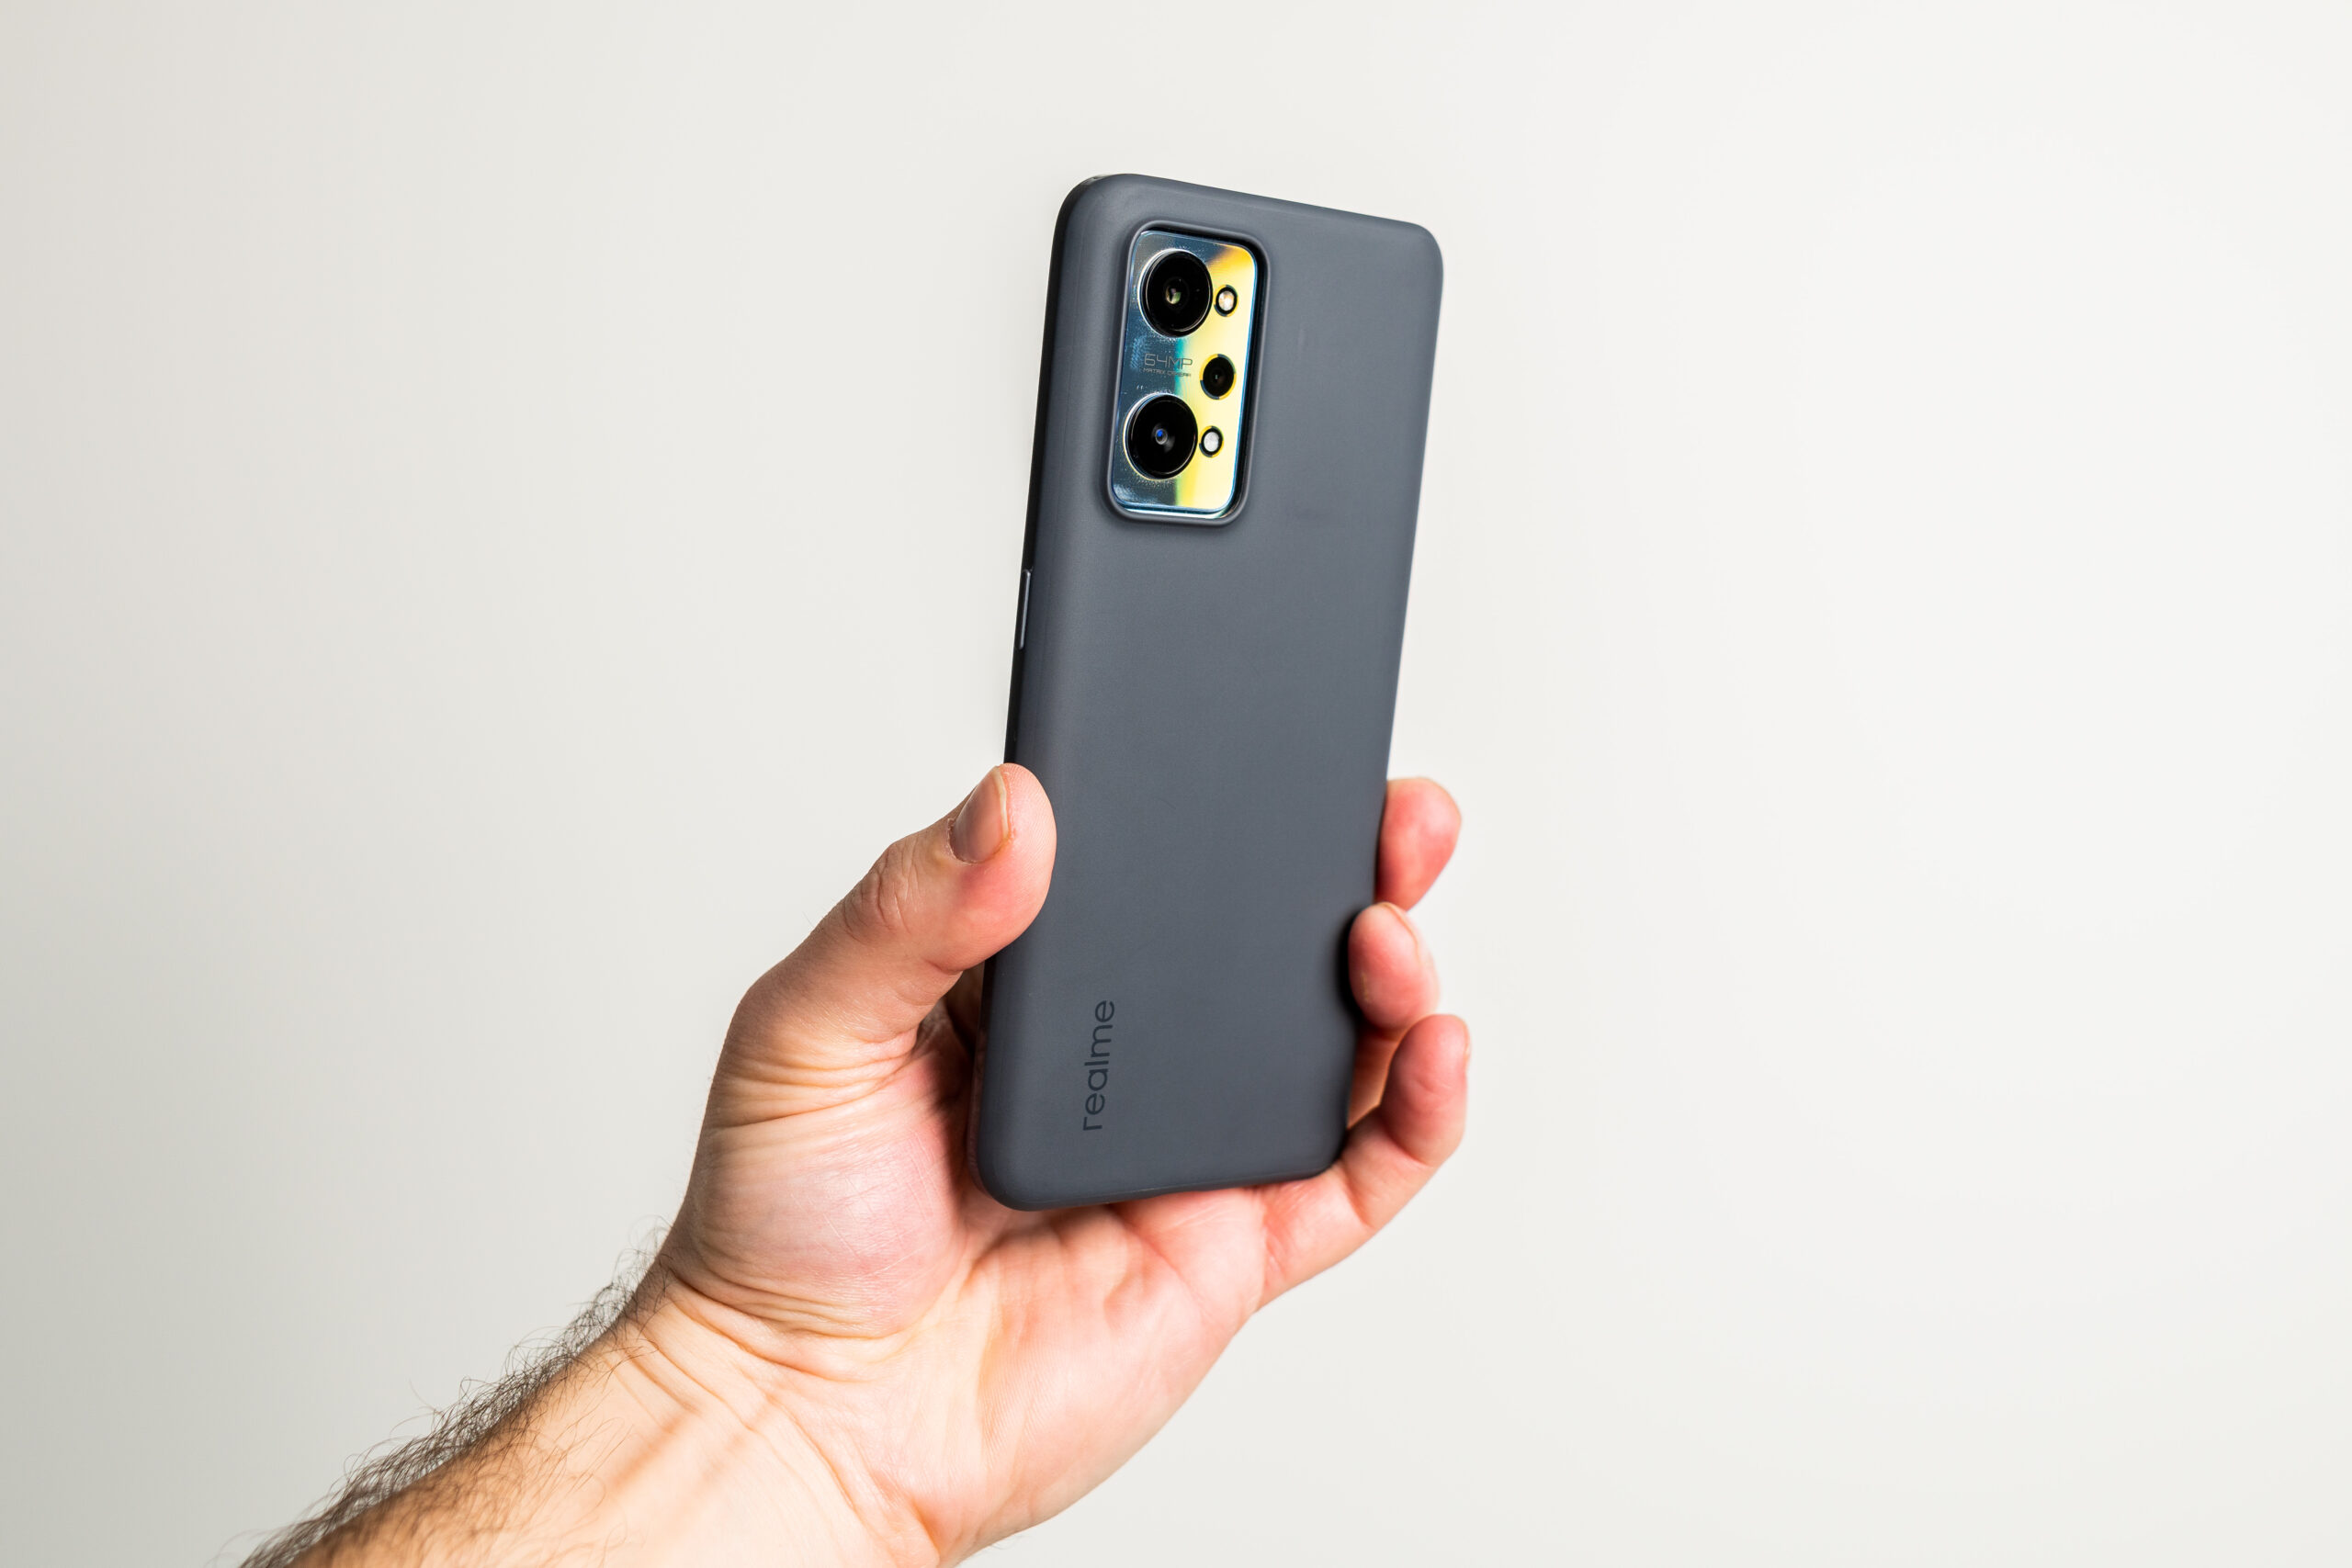 Realme GT Neo 2 Review - King of Sustained Performance - MySmartPrice